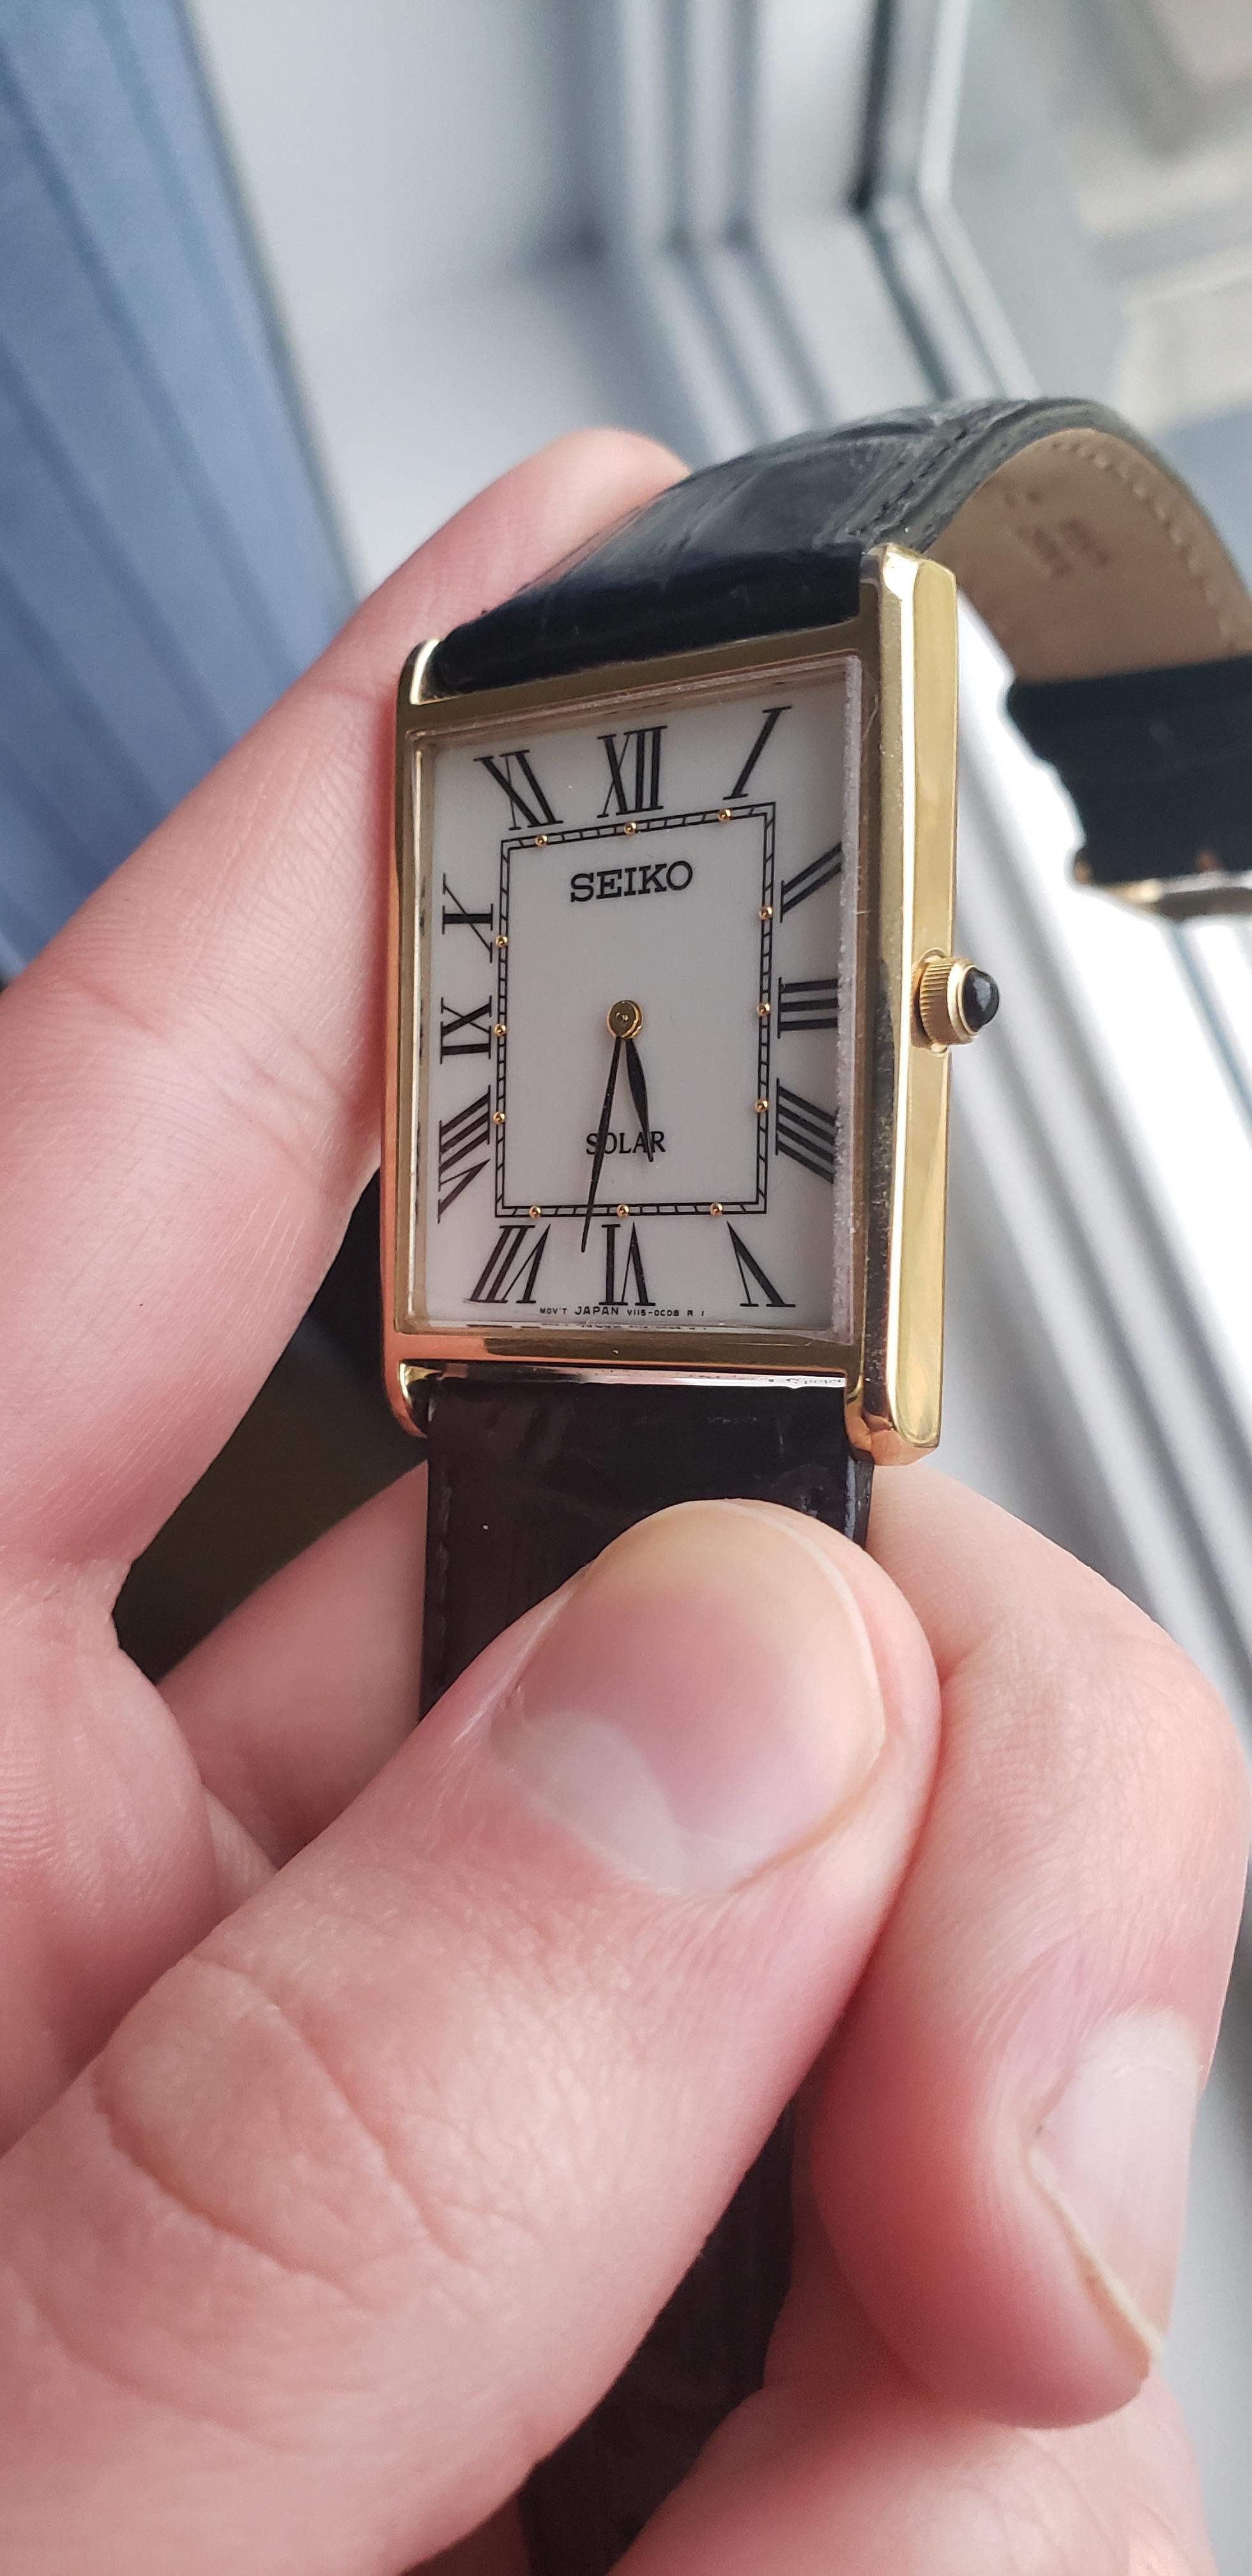 WTS] Seiko SUP880 Mint Condition + Brown Strap- Cartier Tank on a Budget! |  WatchCharts